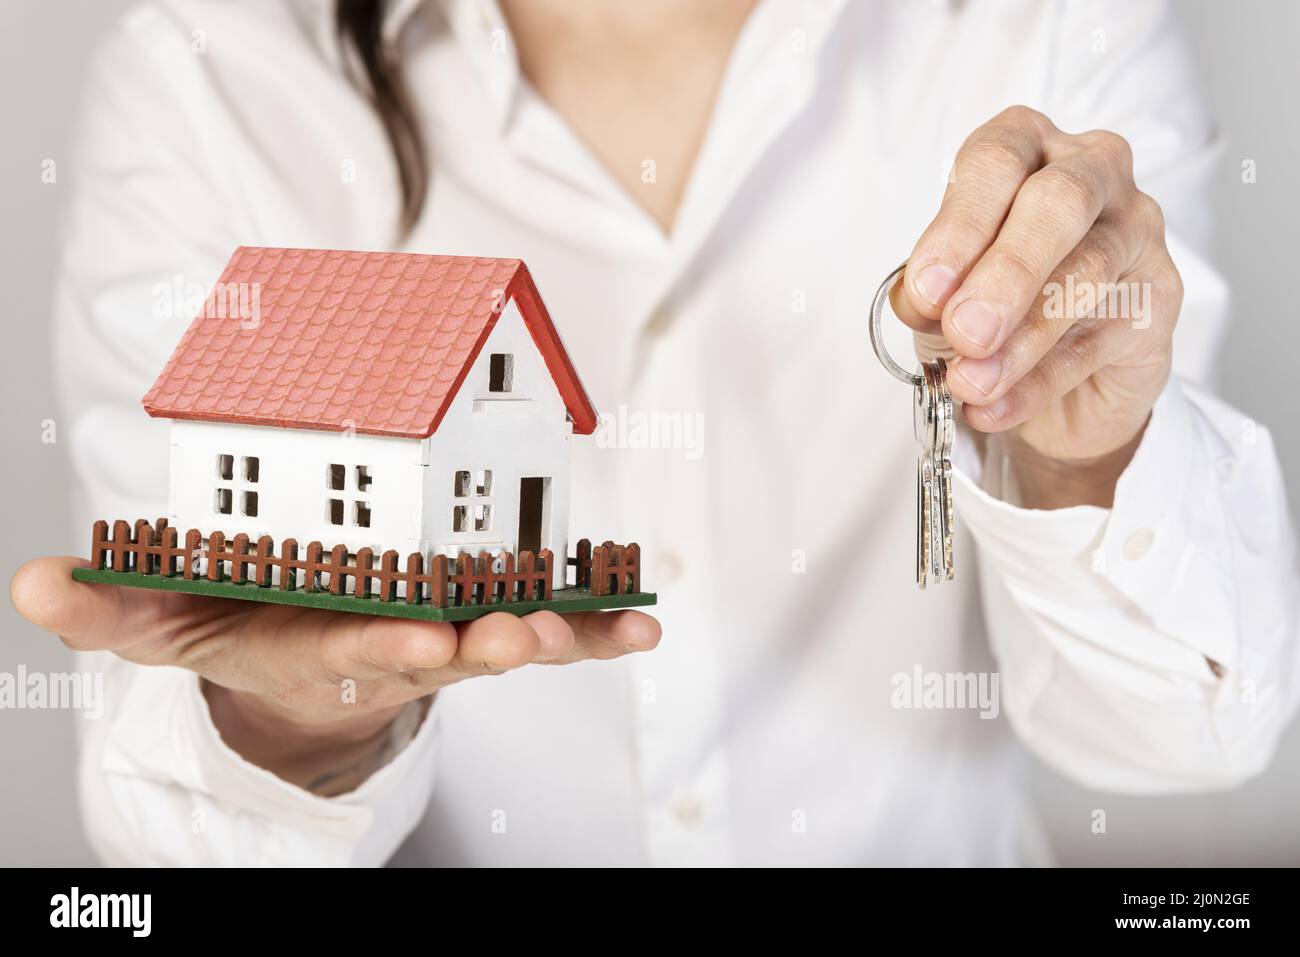 Female holding a toy model house and keys Stock Photo